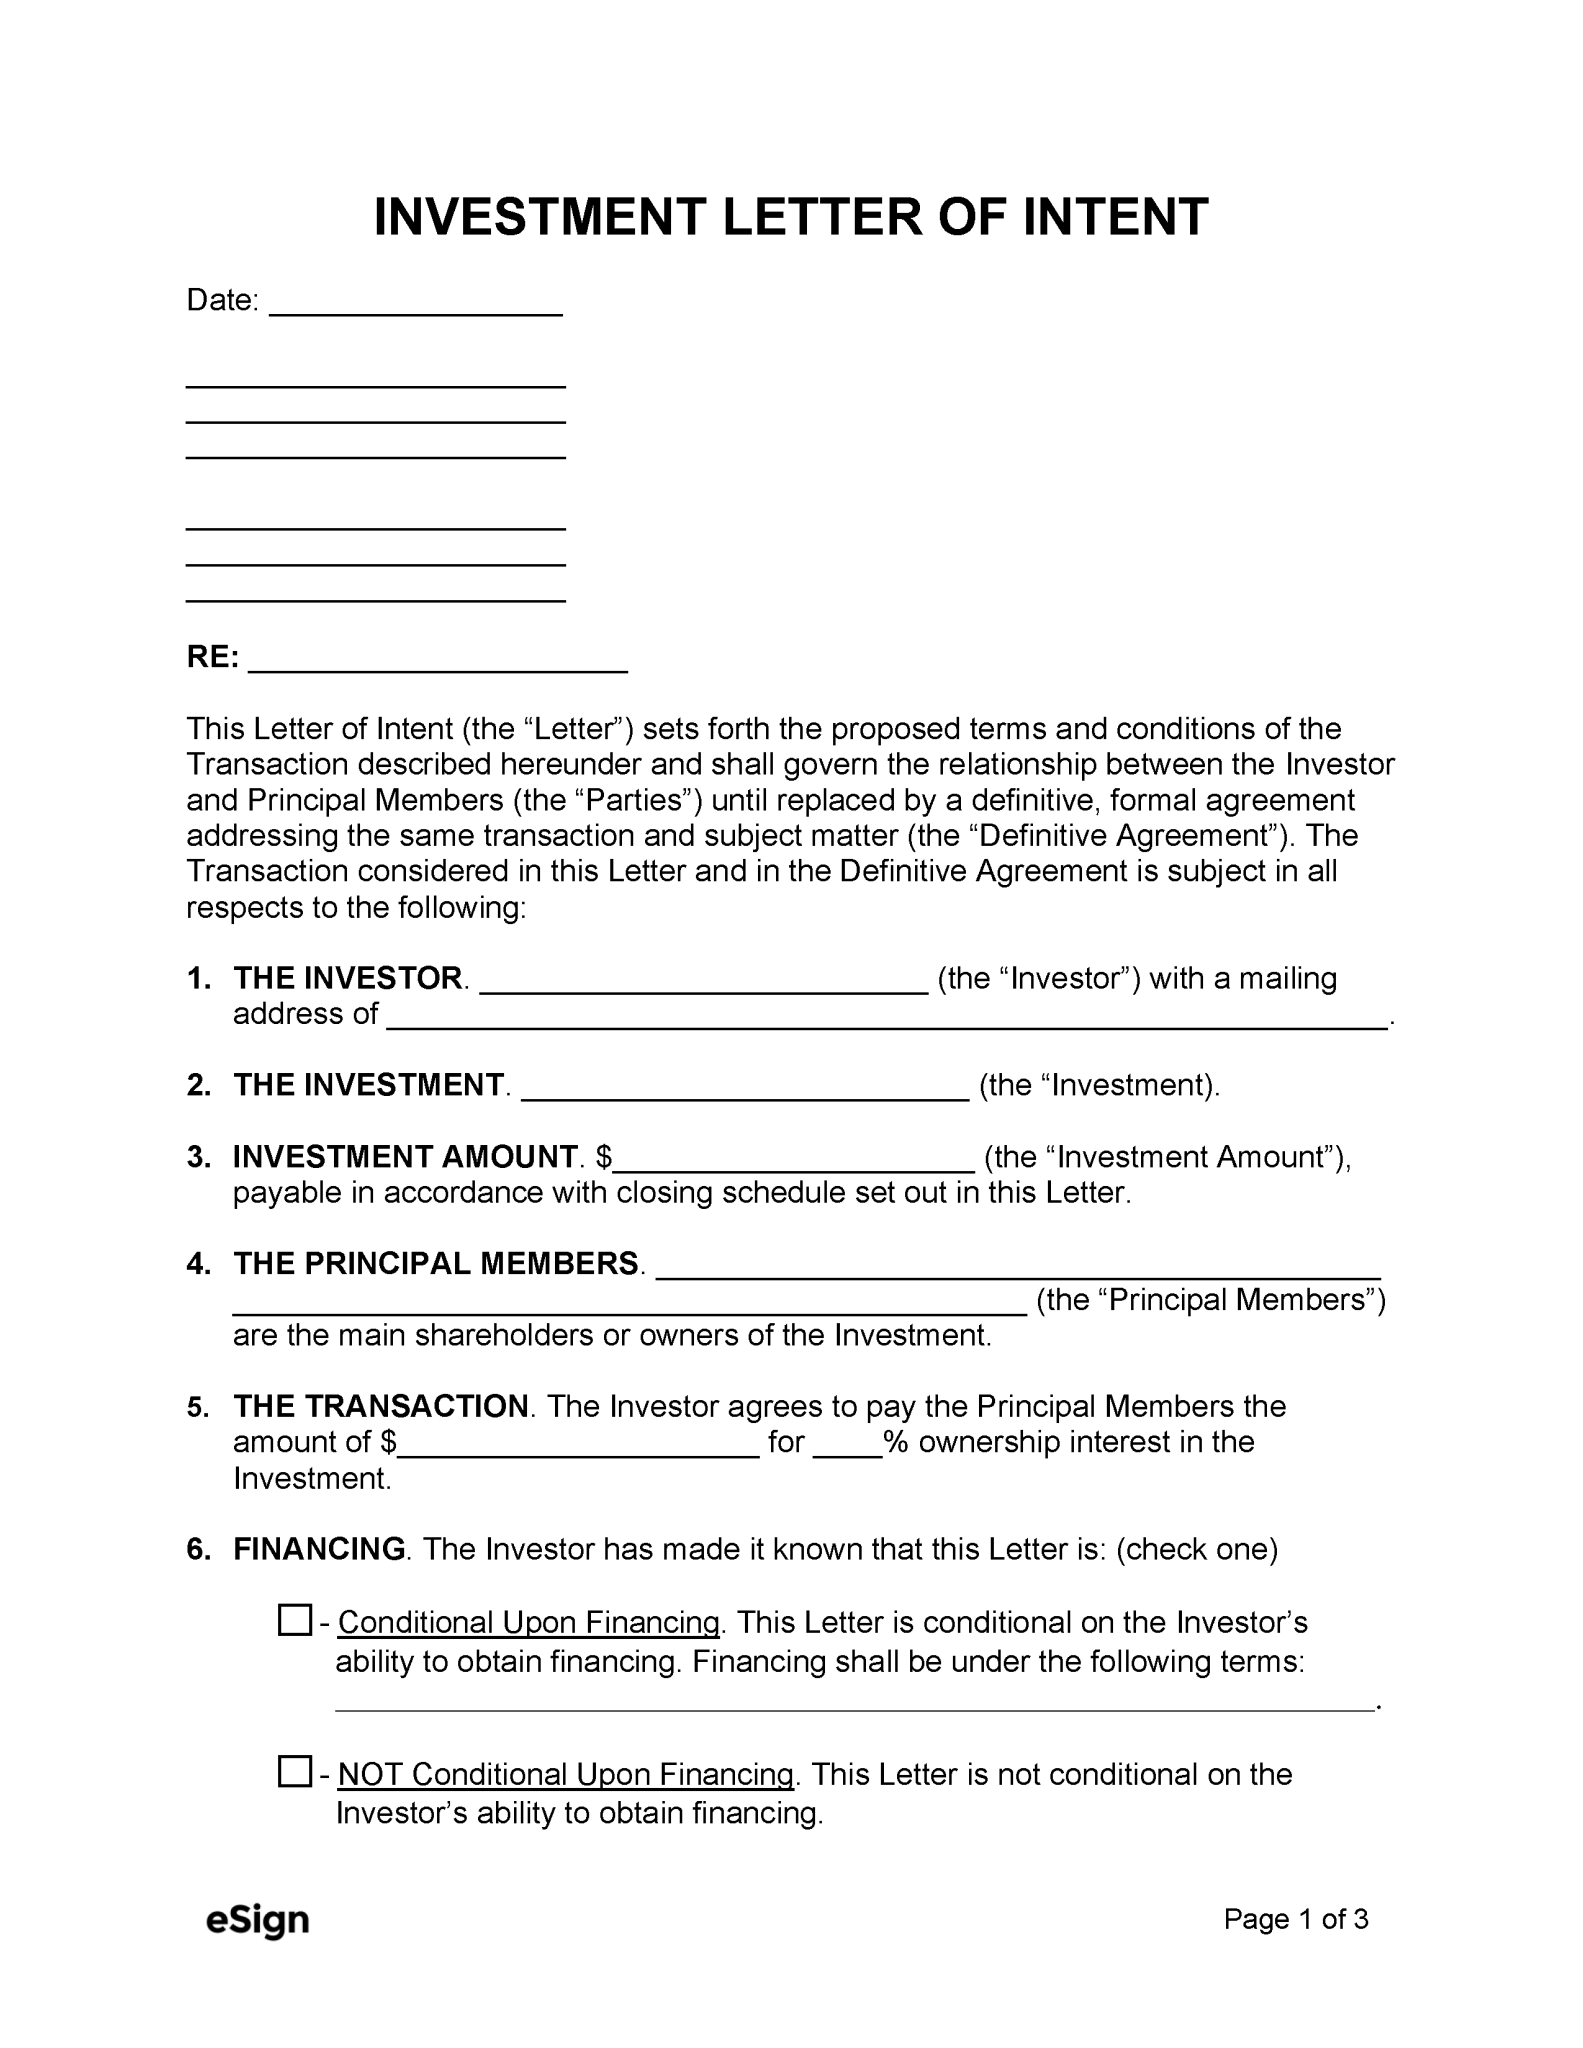 Free Investment Letter of Intent Template | PDF | Word